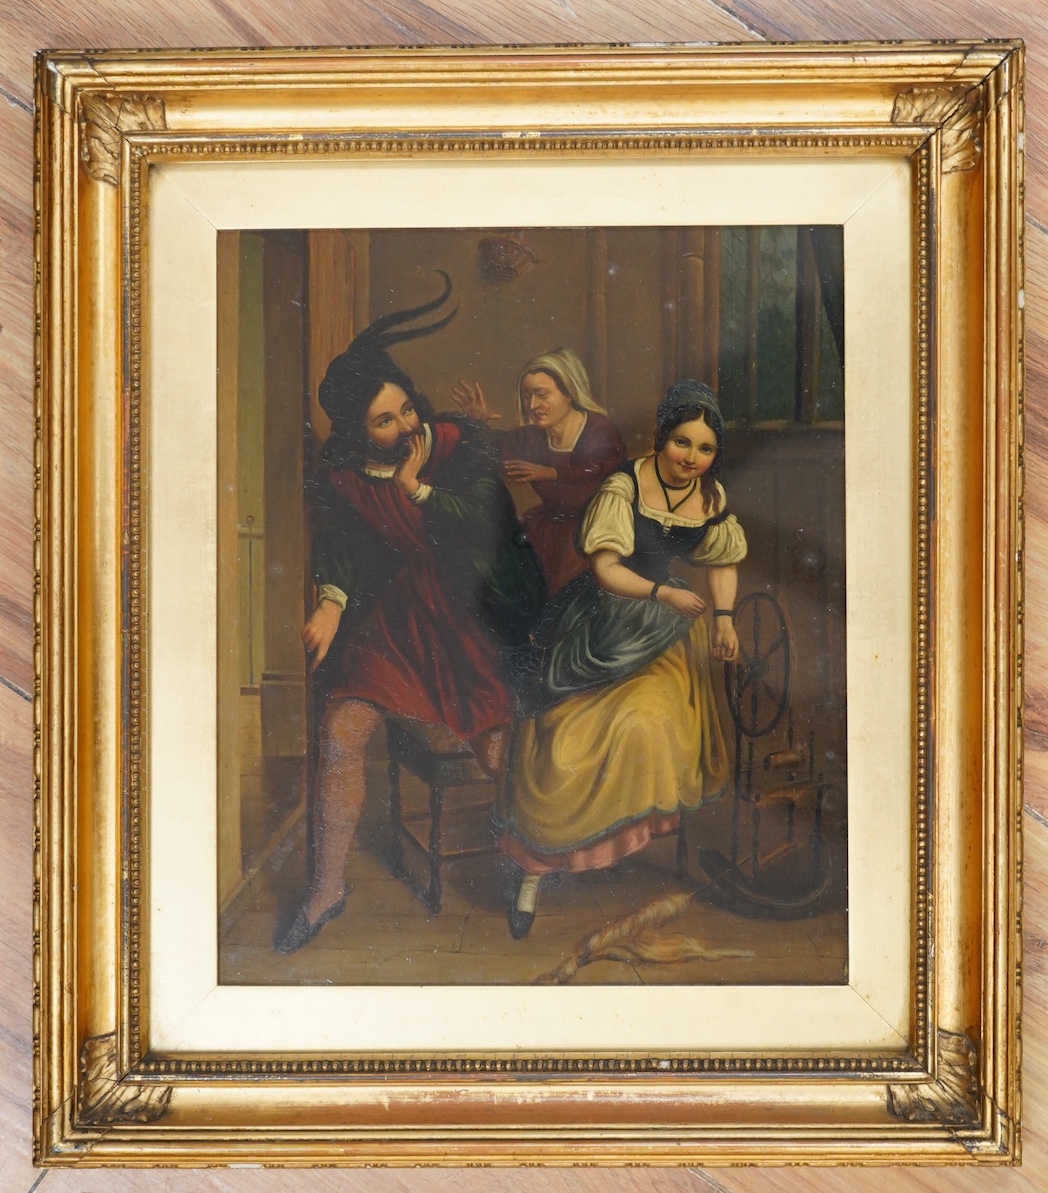 19th century German School, oil on metal panel, possibly zinc, Three figures in an interior, 25 x 20cm, gilt framed. Condition - fair to good